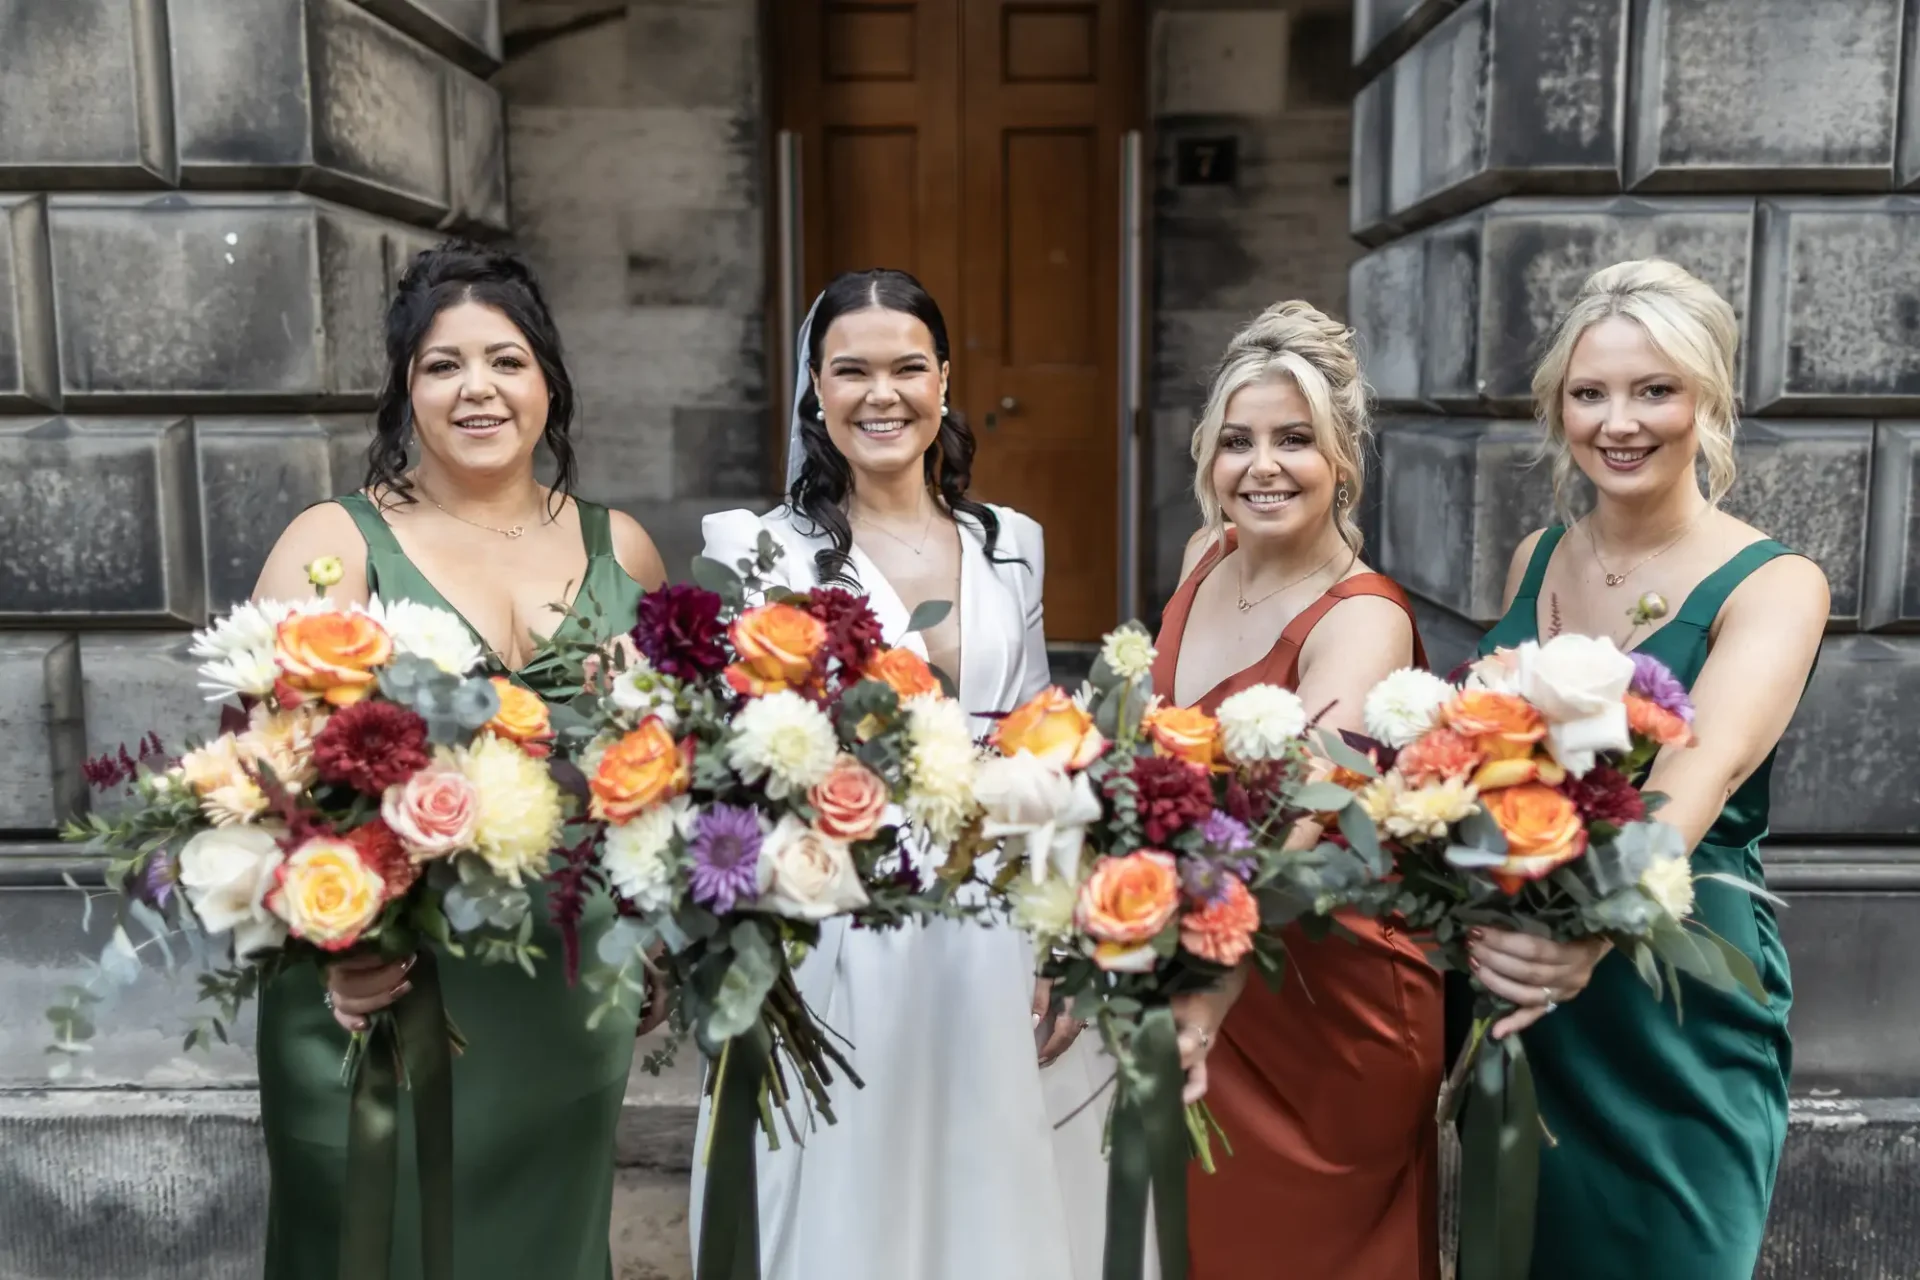 A bride and three bridesmaids posing with large, colorful bouquets in front of a stone building.